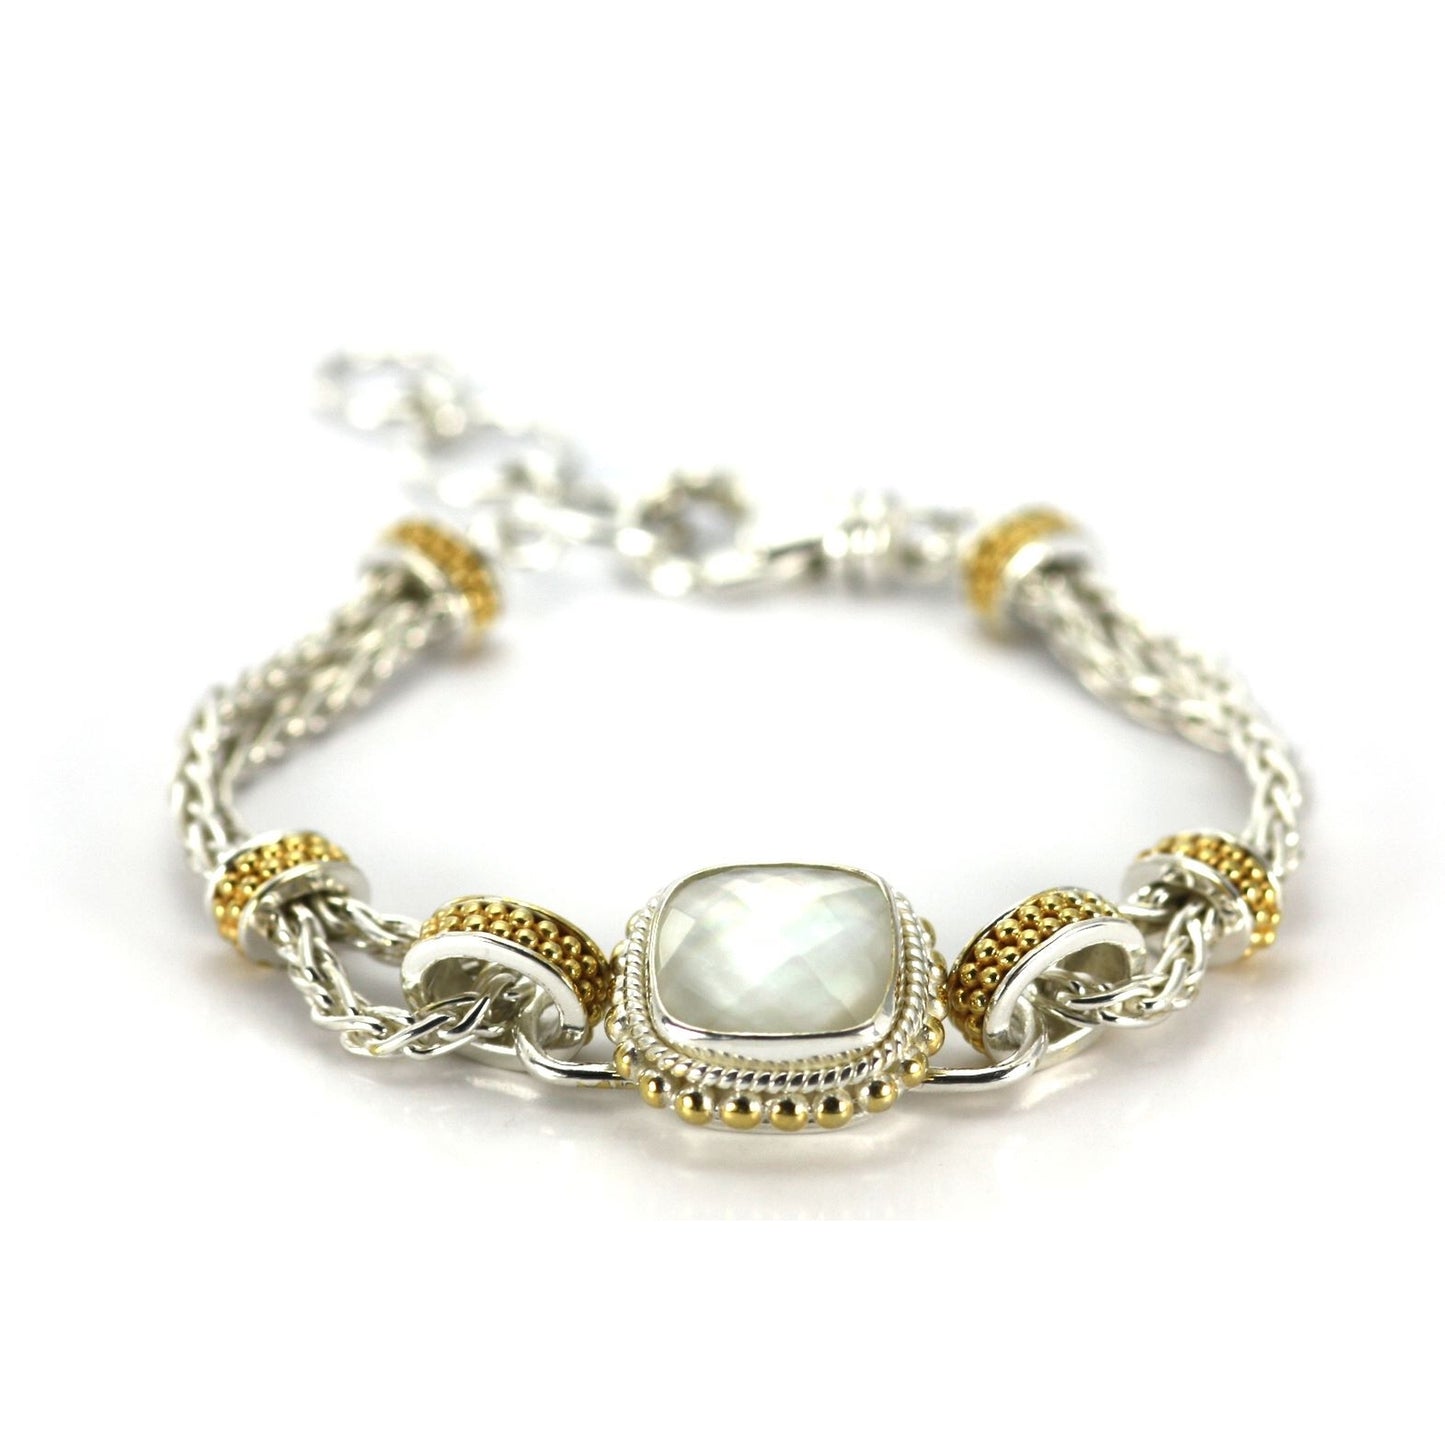 Silver and 18 karat gold vermeil bracelet with one center station with a mother of pearl doublet gemstone.